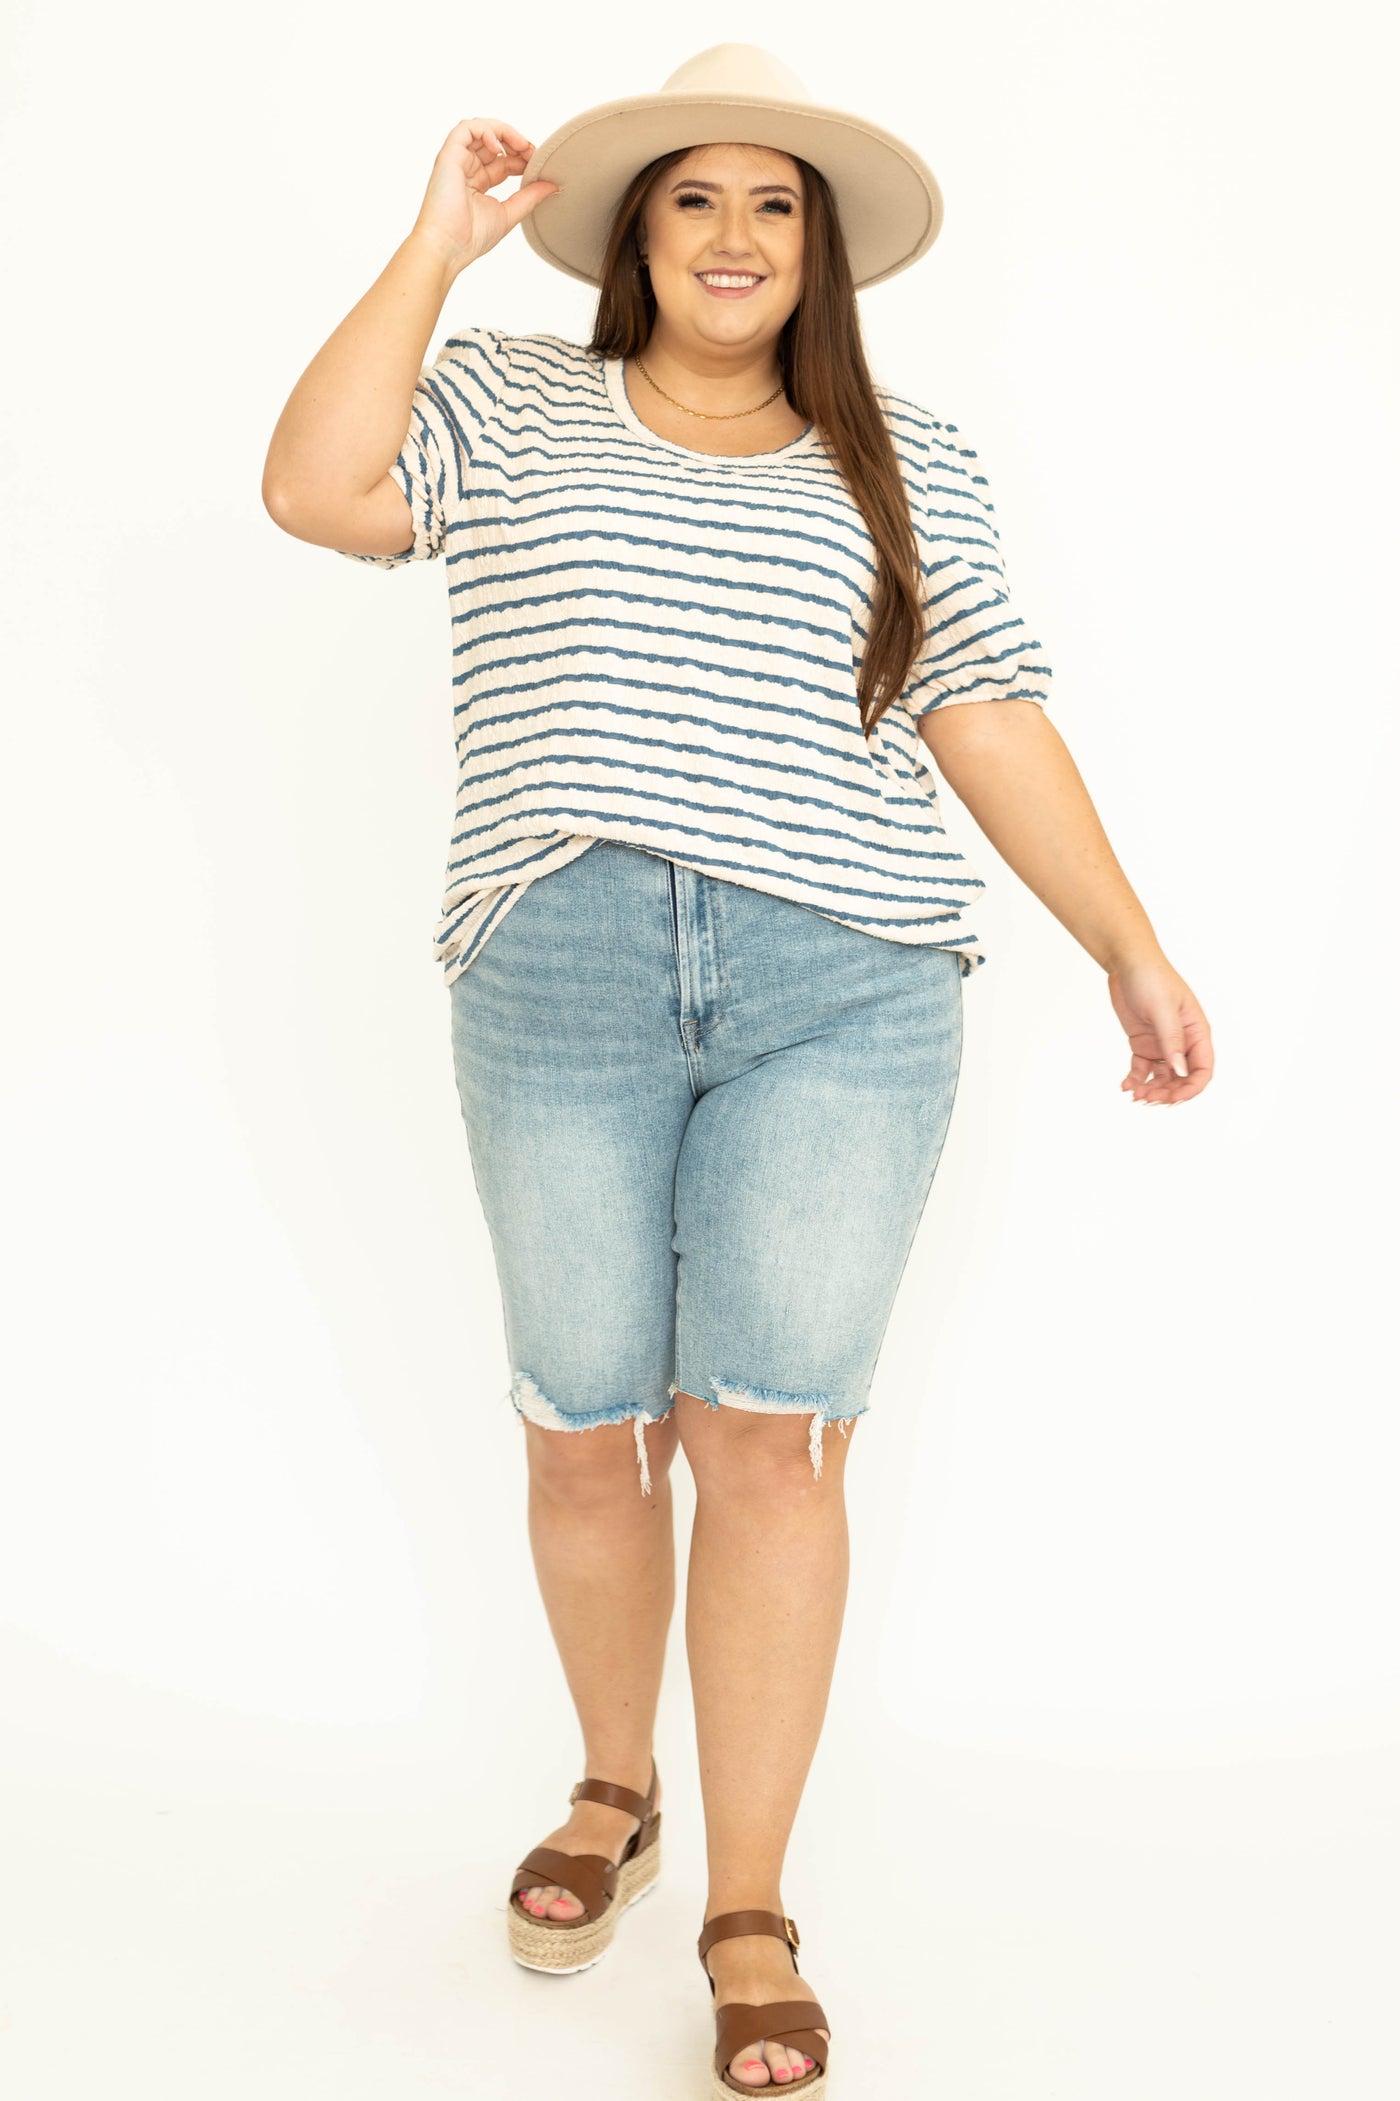 Plus size of a blue and cream striped top